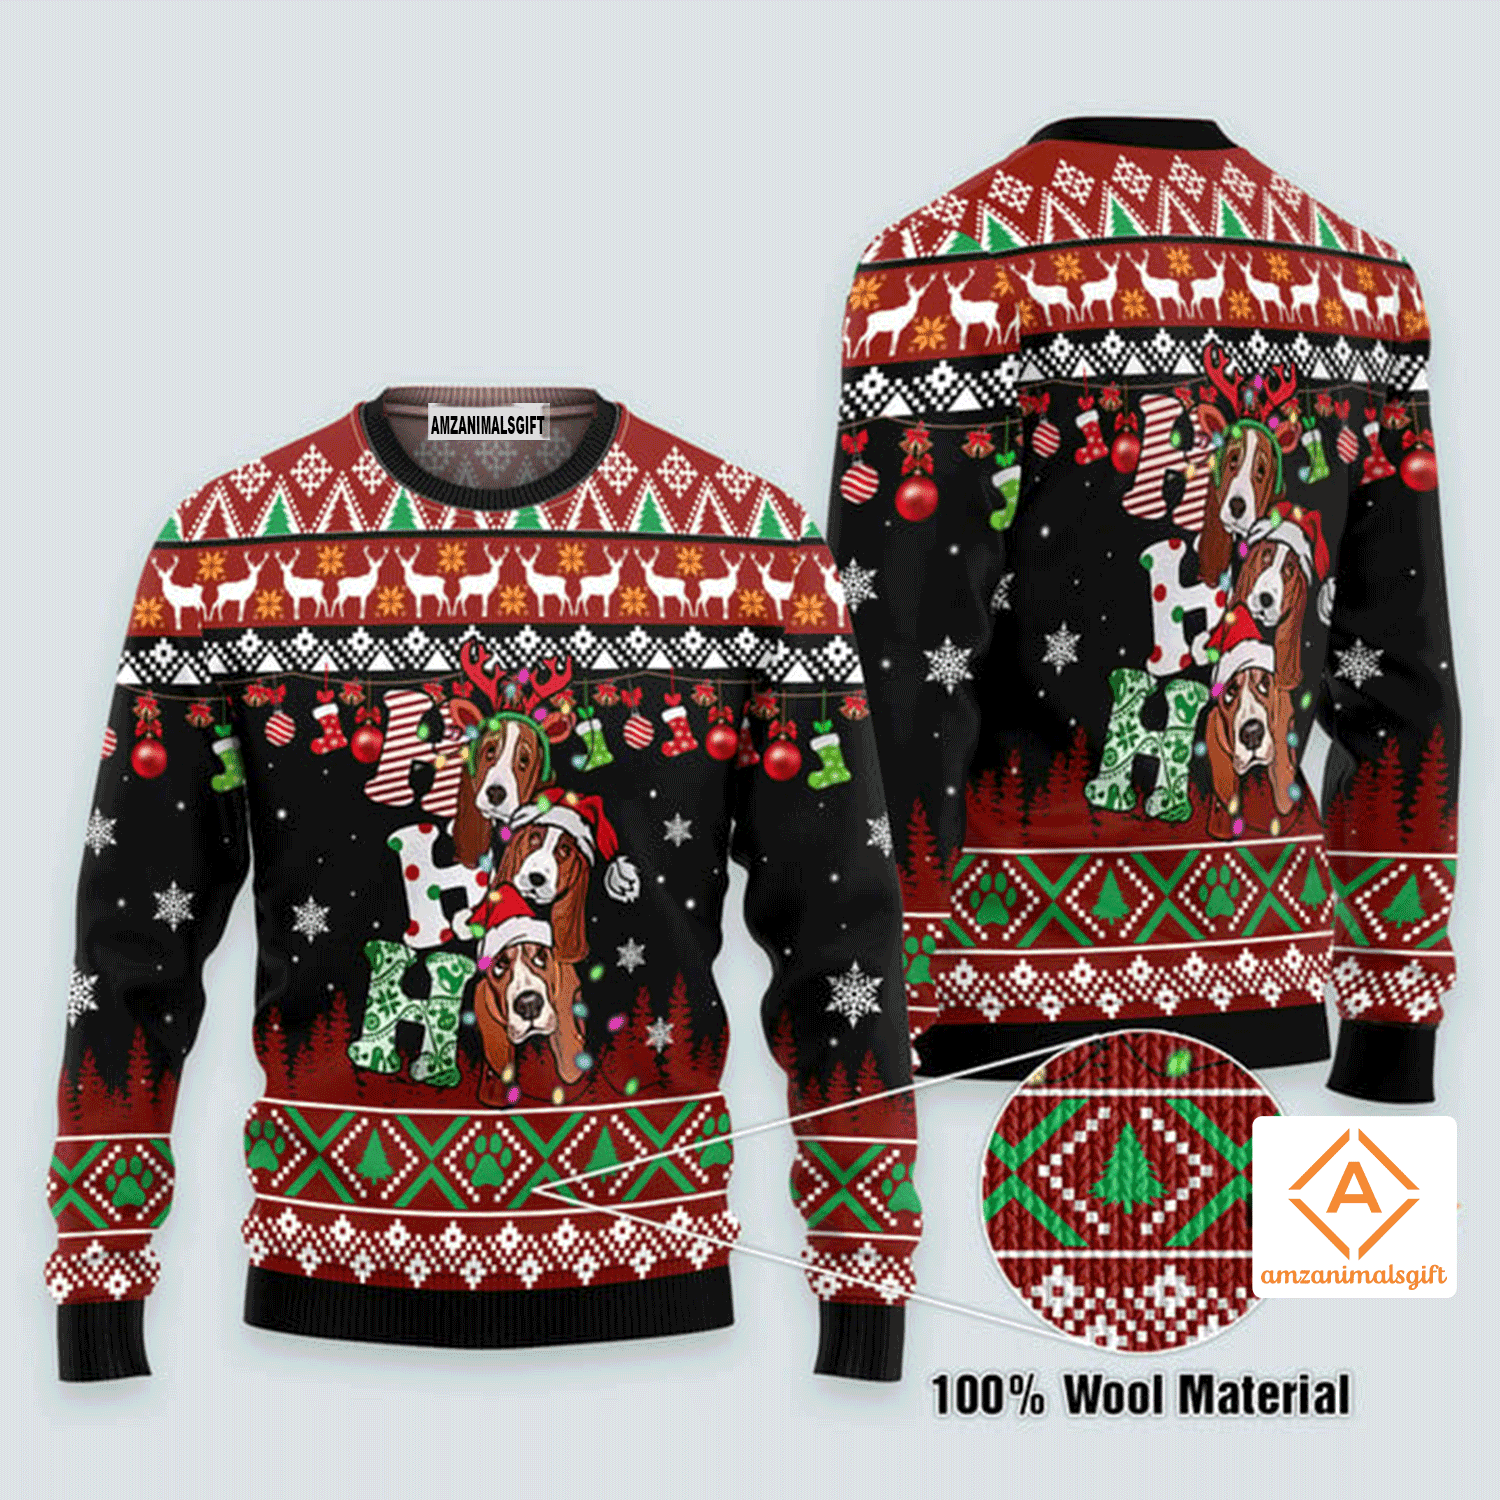 Basset Hound Ho Ho Ho Ugly Christmas Sweater, Ugly Sweater For Men & Women, Perfect Outfit For Christmas New Year Autumn Winter